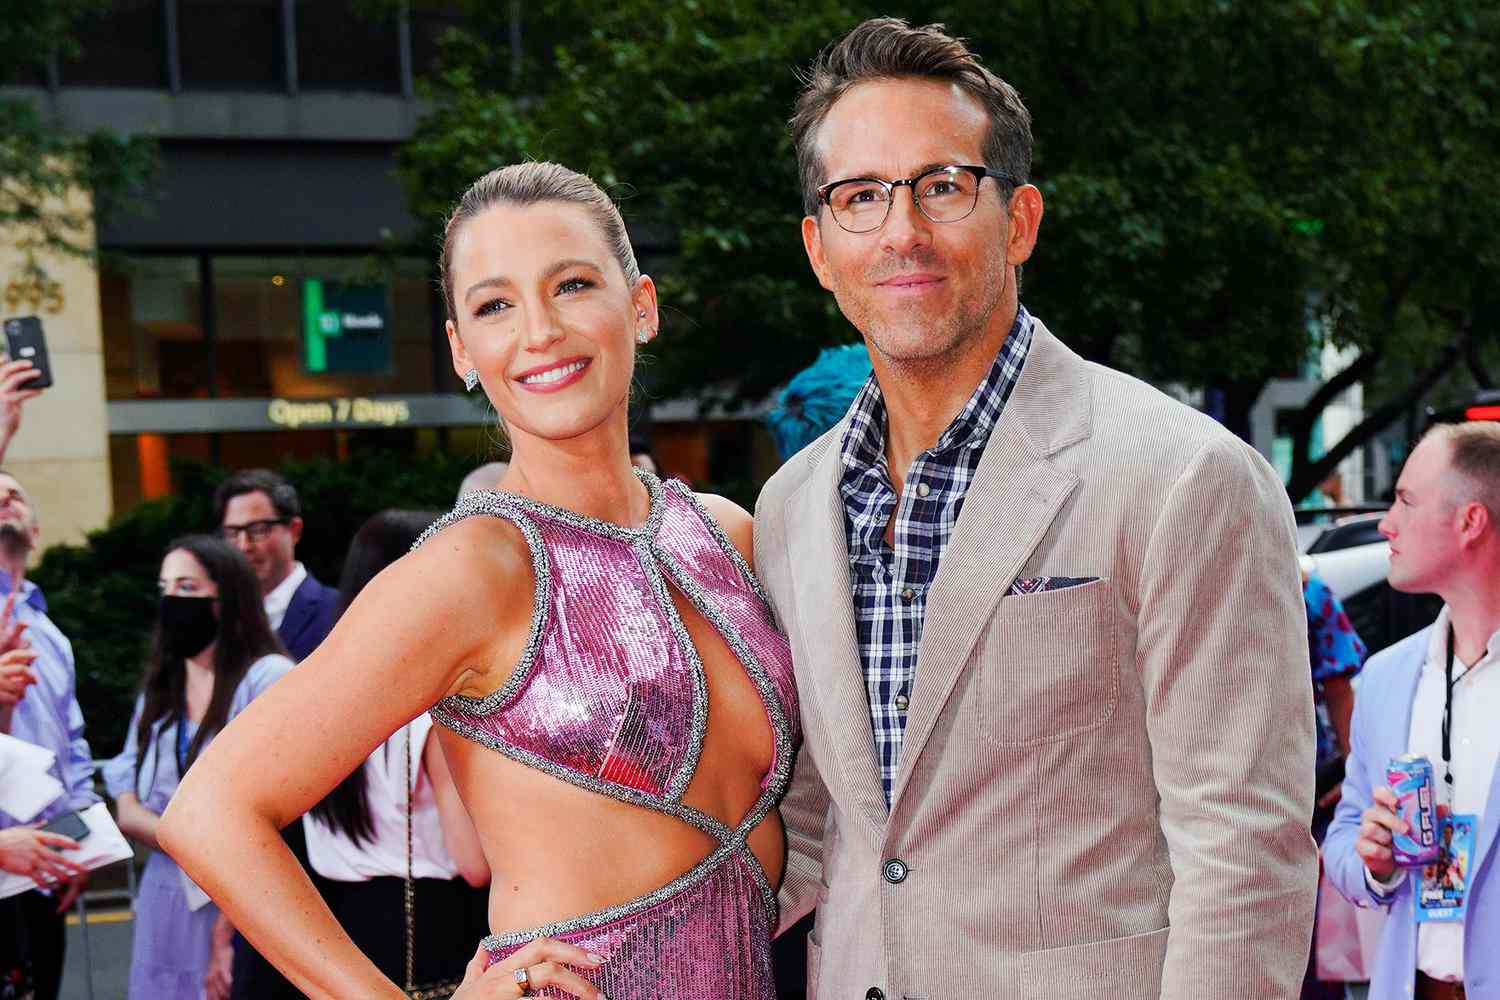 Ryan Reynolds says Blake Lively has helped him with 'A++ writing' on  Deadpool and other movies 